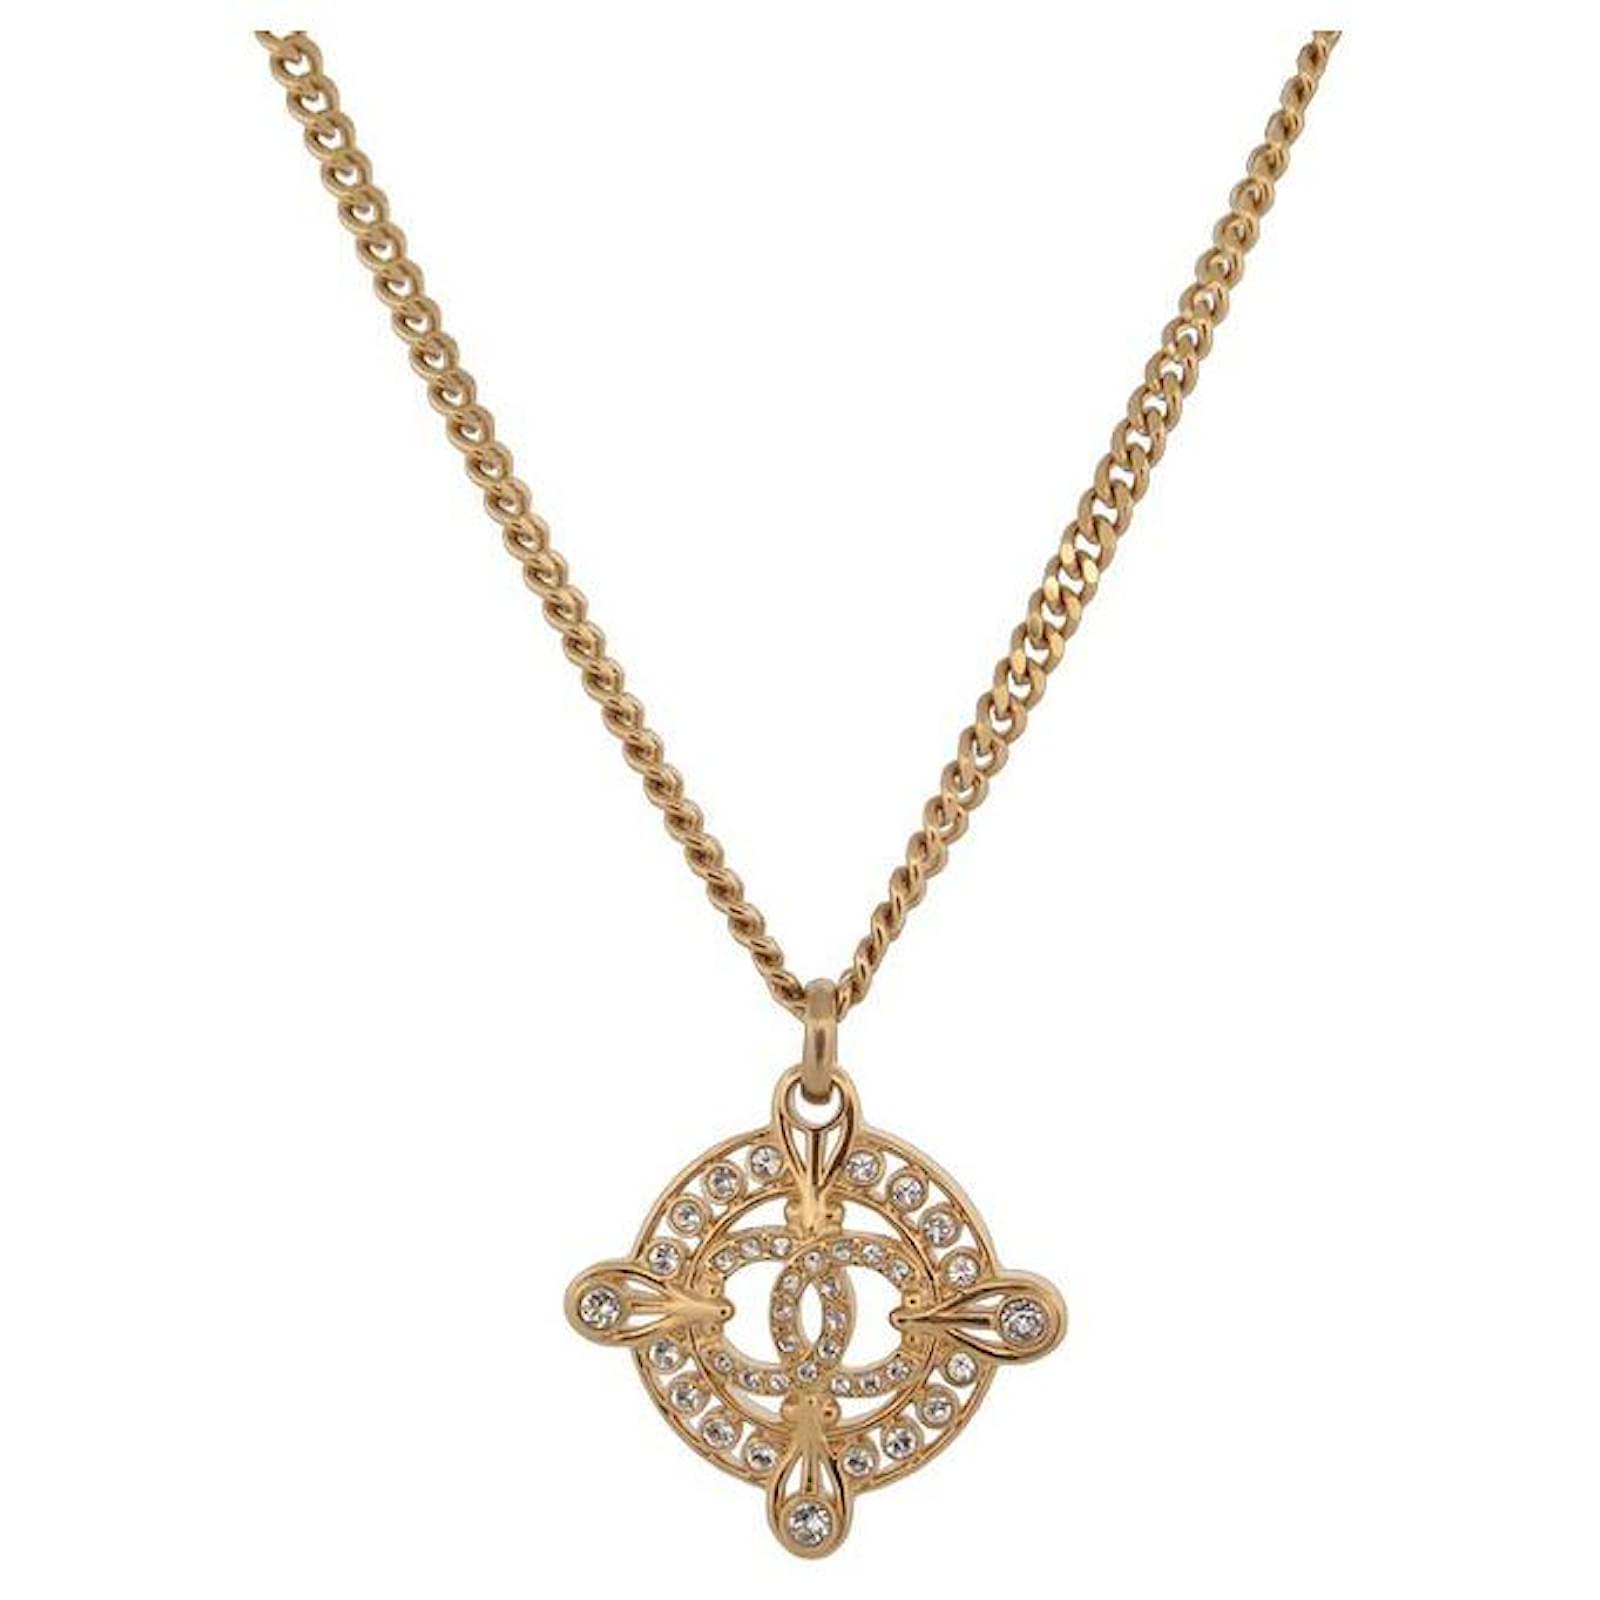 NEW CHANEL NECKLACE CC LOGO PENDANT STRASS GOLD METAL 43/50 NECKLACE